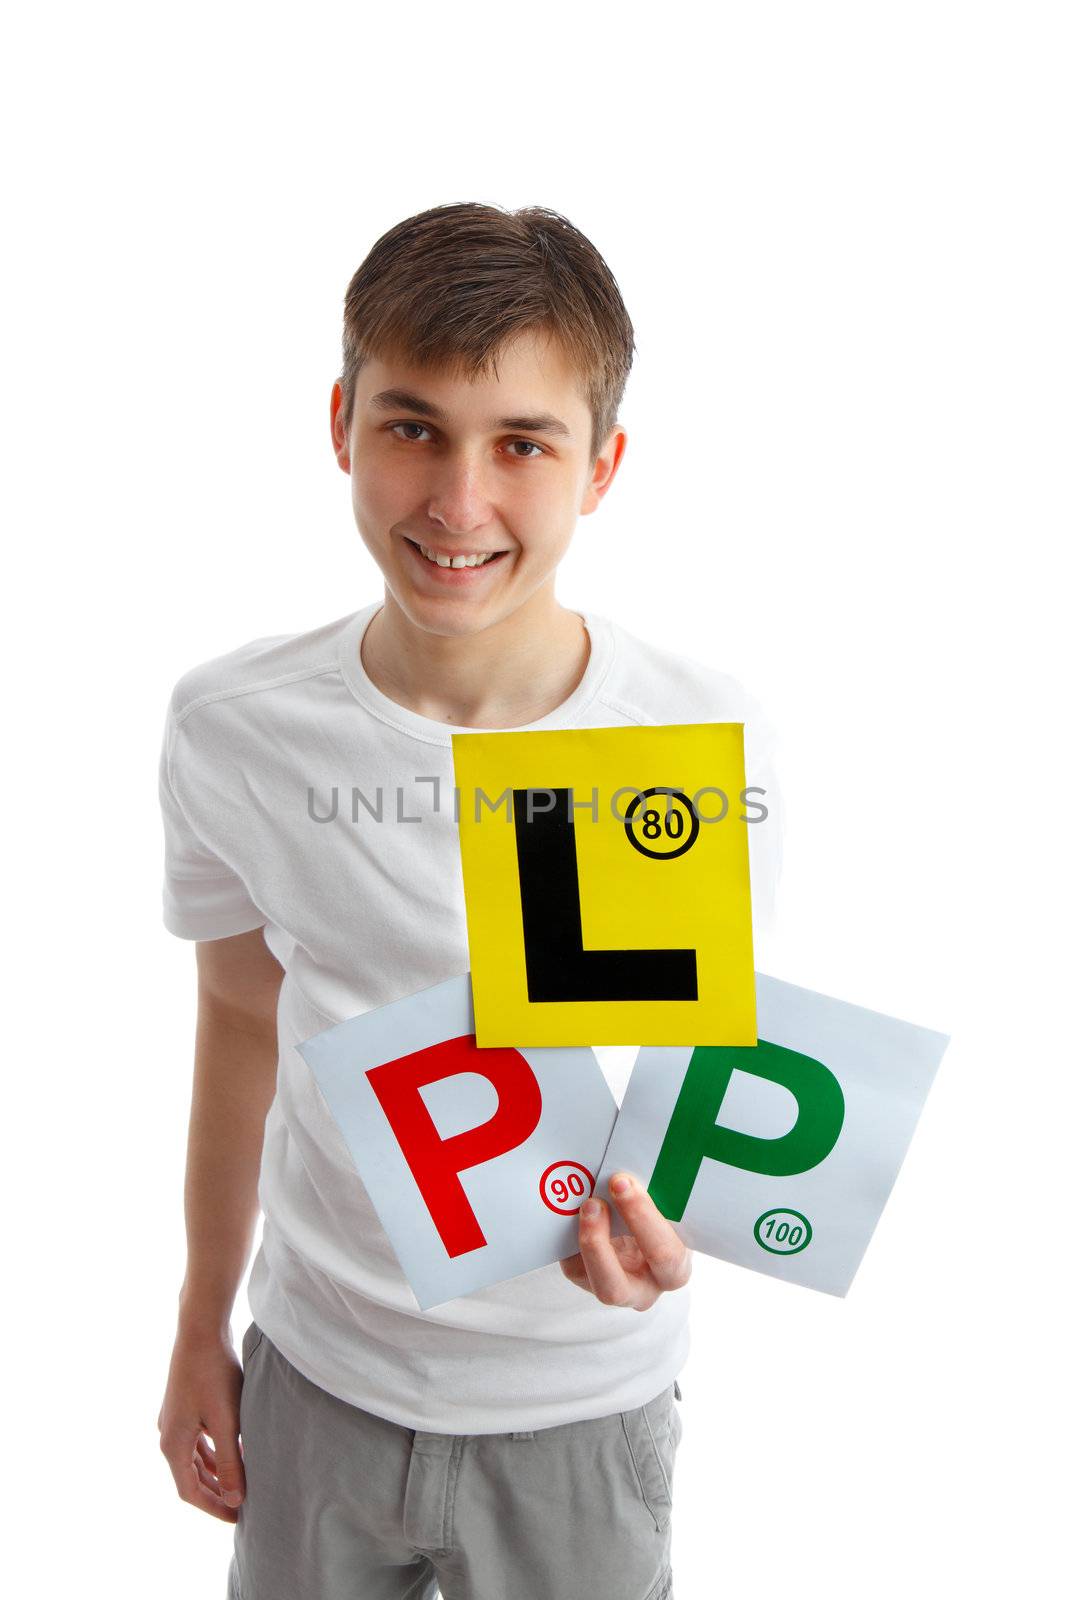 A teenage boy holding three magnetic licence plate signs for displaying on car.